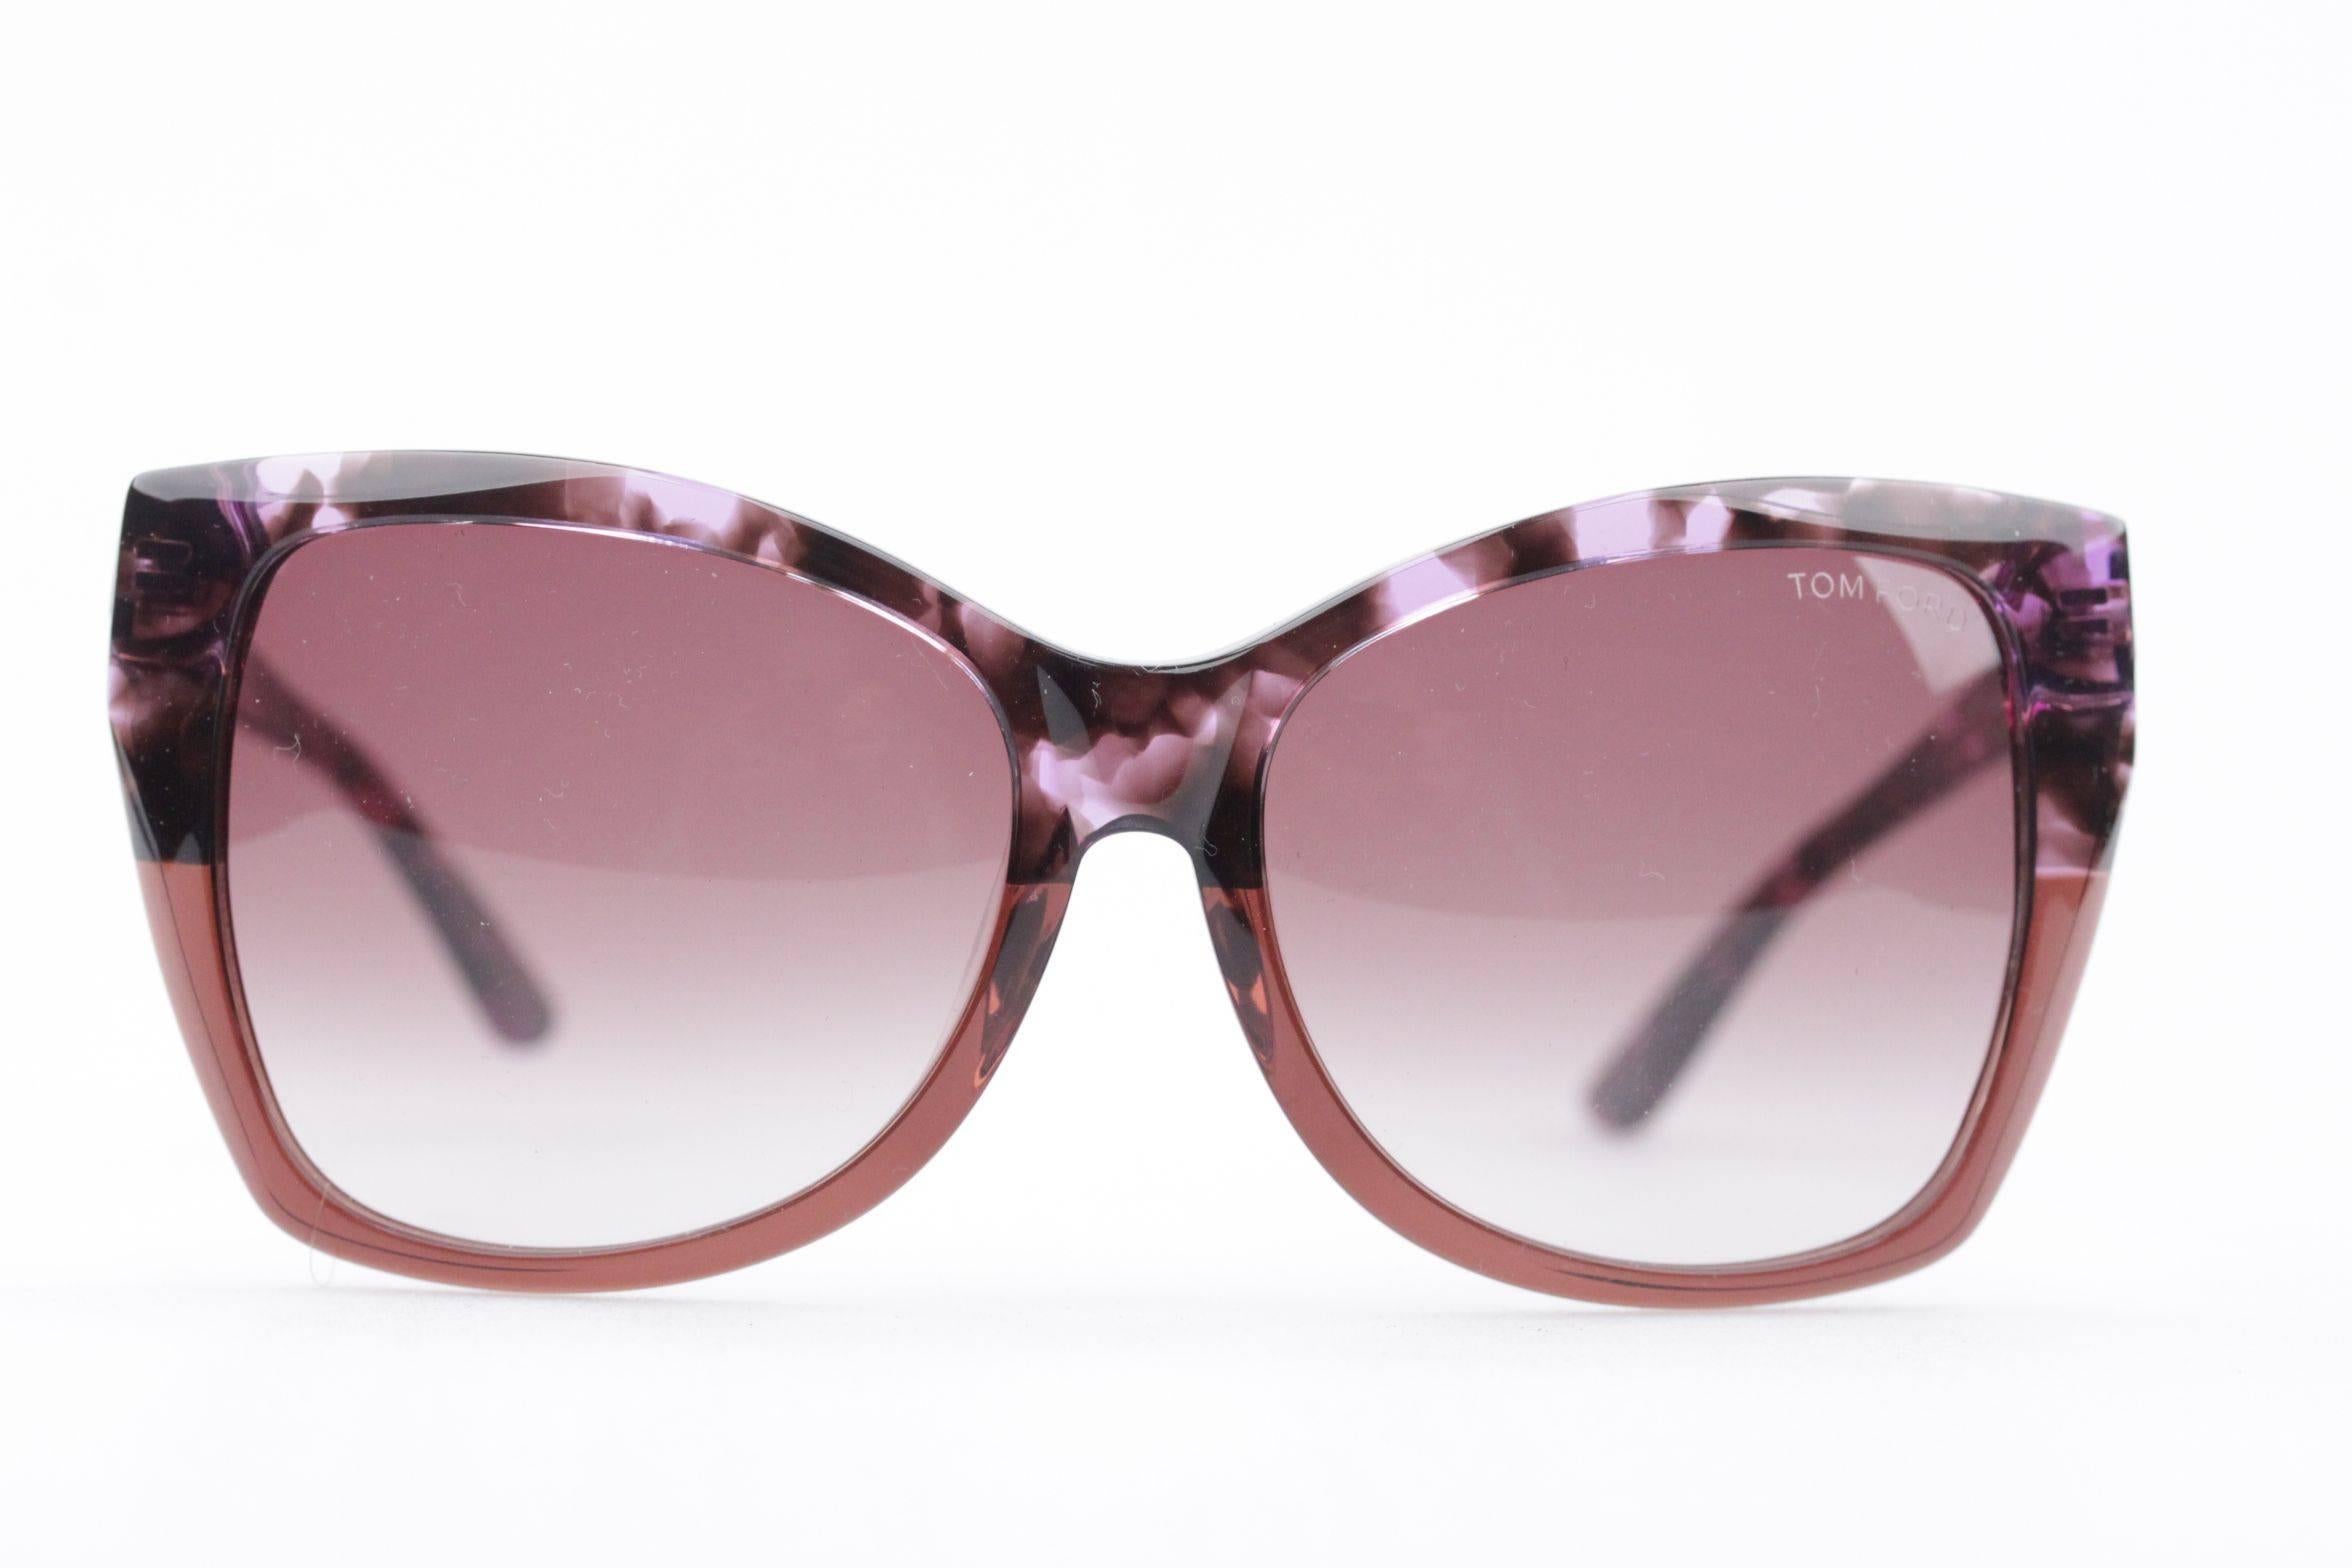  - CARLI TF 295 sunglasses by Tom Ford
- Two-tone plastic angular cat eye sunglasses with tortoiseshell detailing,
- Goldtone T-shape insets at temples and signature logo at temple tips.
- Color: Violet Havana
- Gradient 100% UV protection